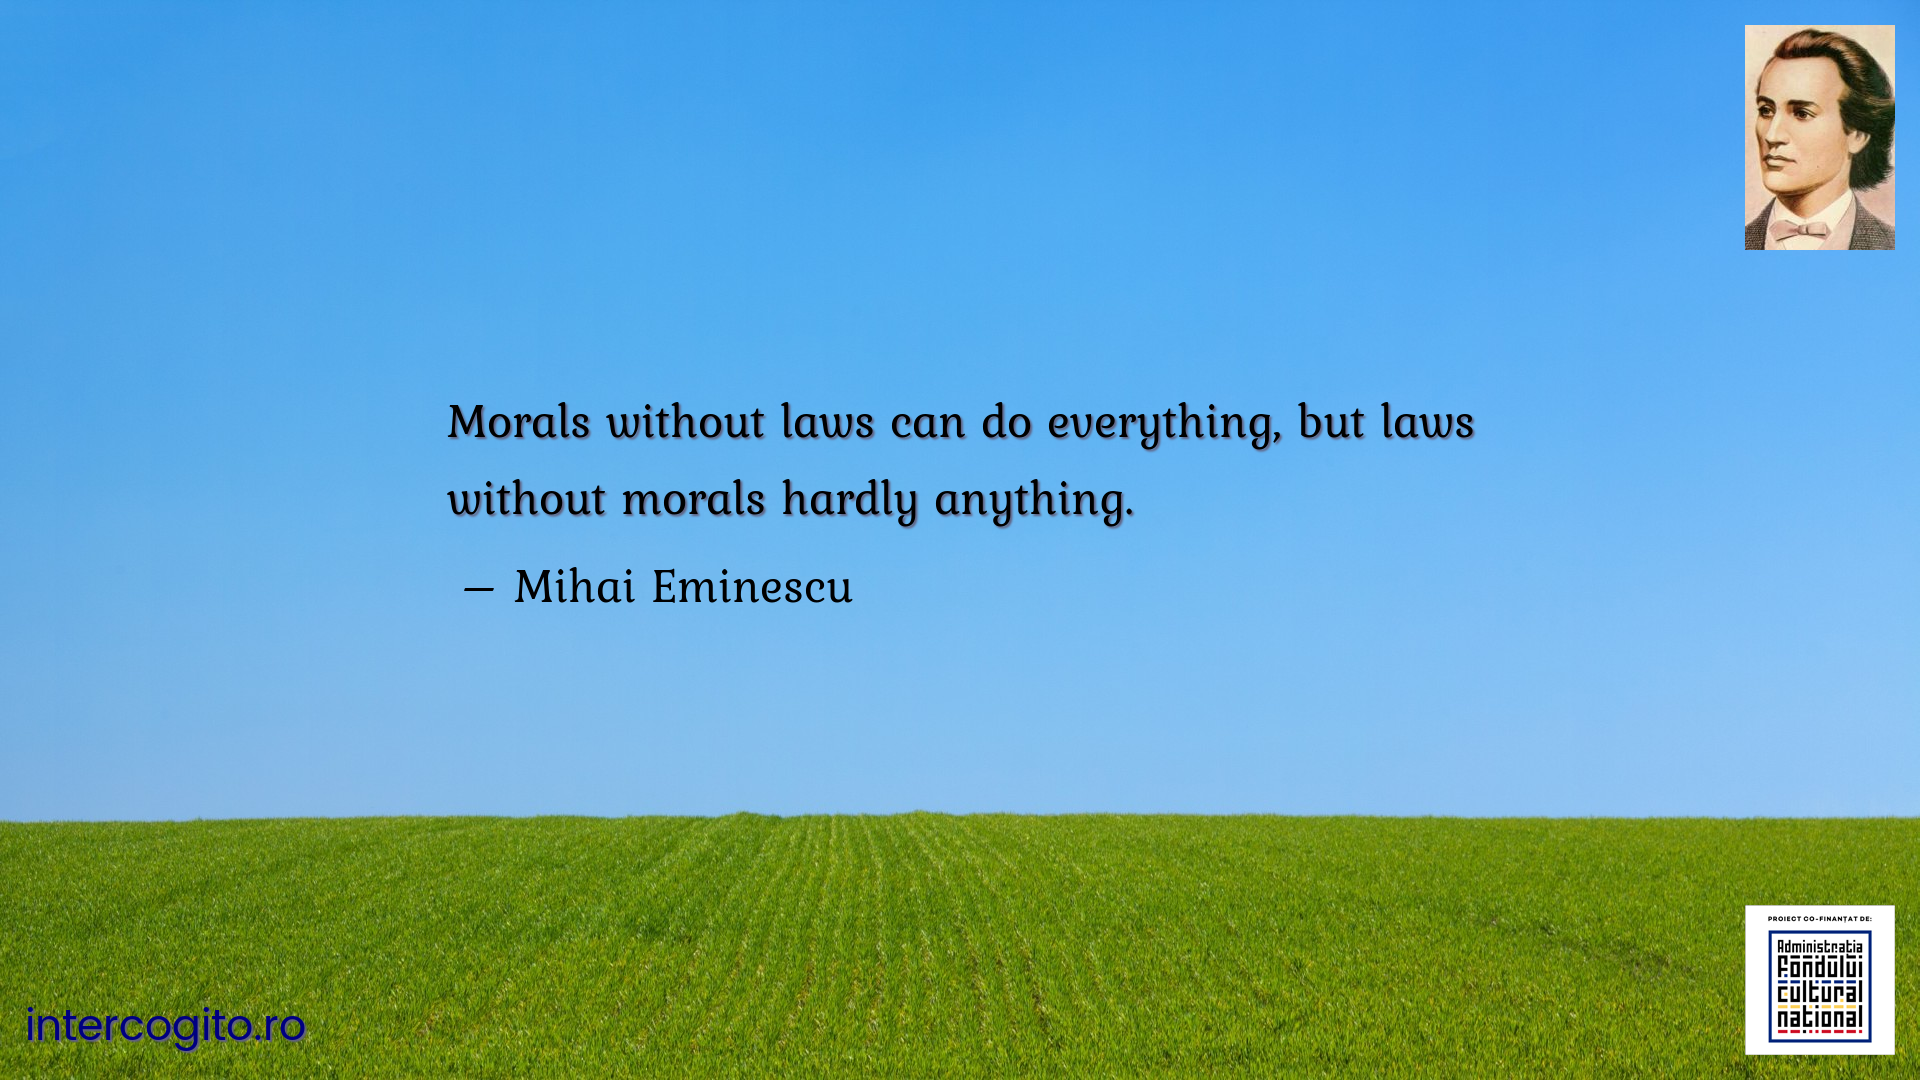 Morals without laws can do everything, but laws without morals hardly anything.